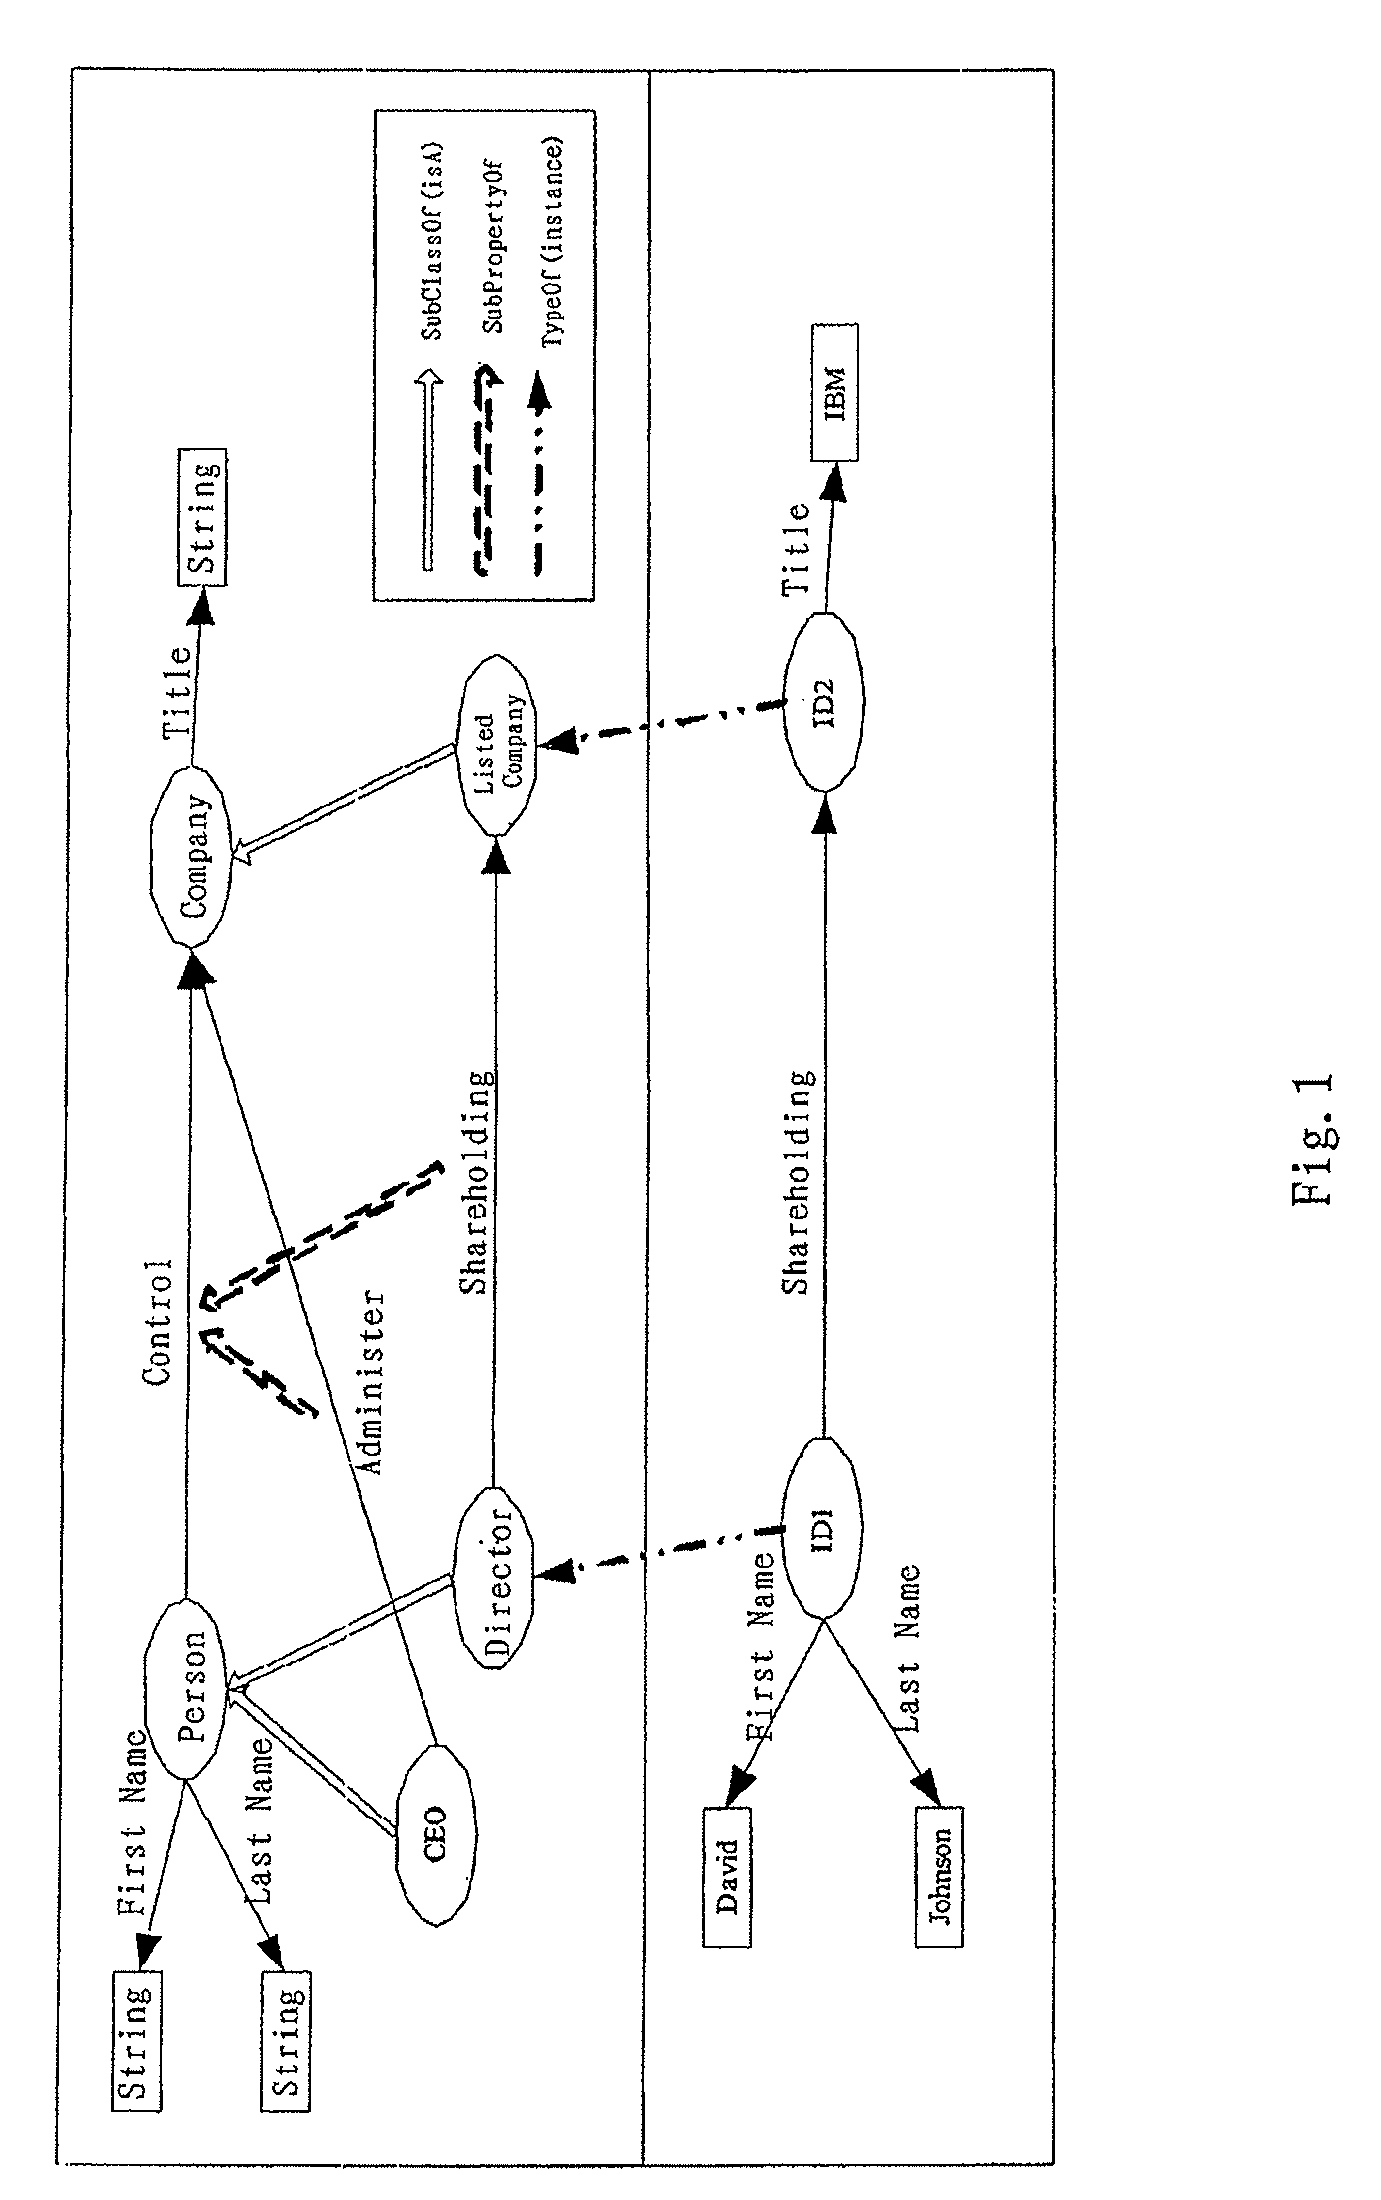 System and method for automatically refining ontology within specific context